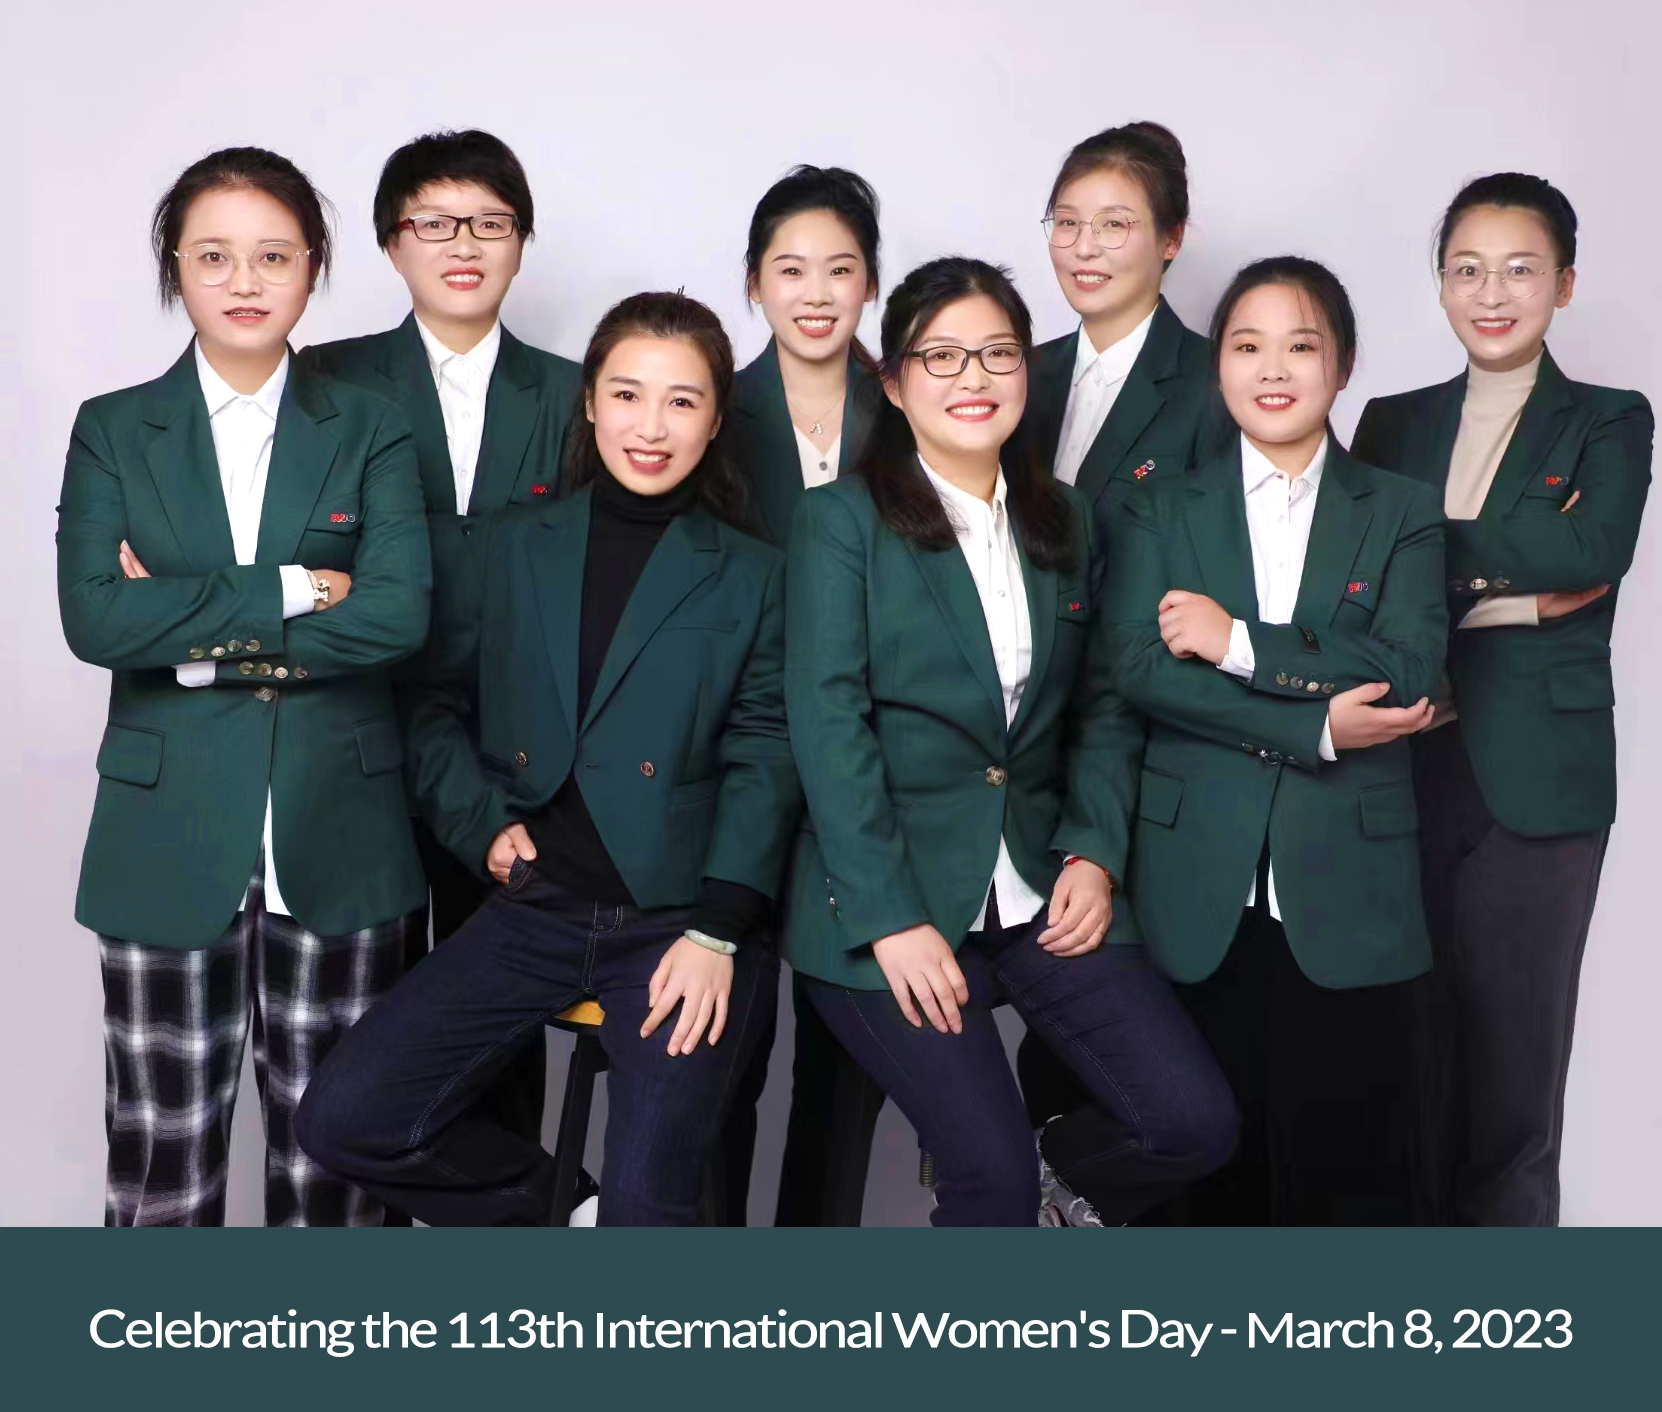 Celebrating the 113th International Women’s Day – March 8, 2023